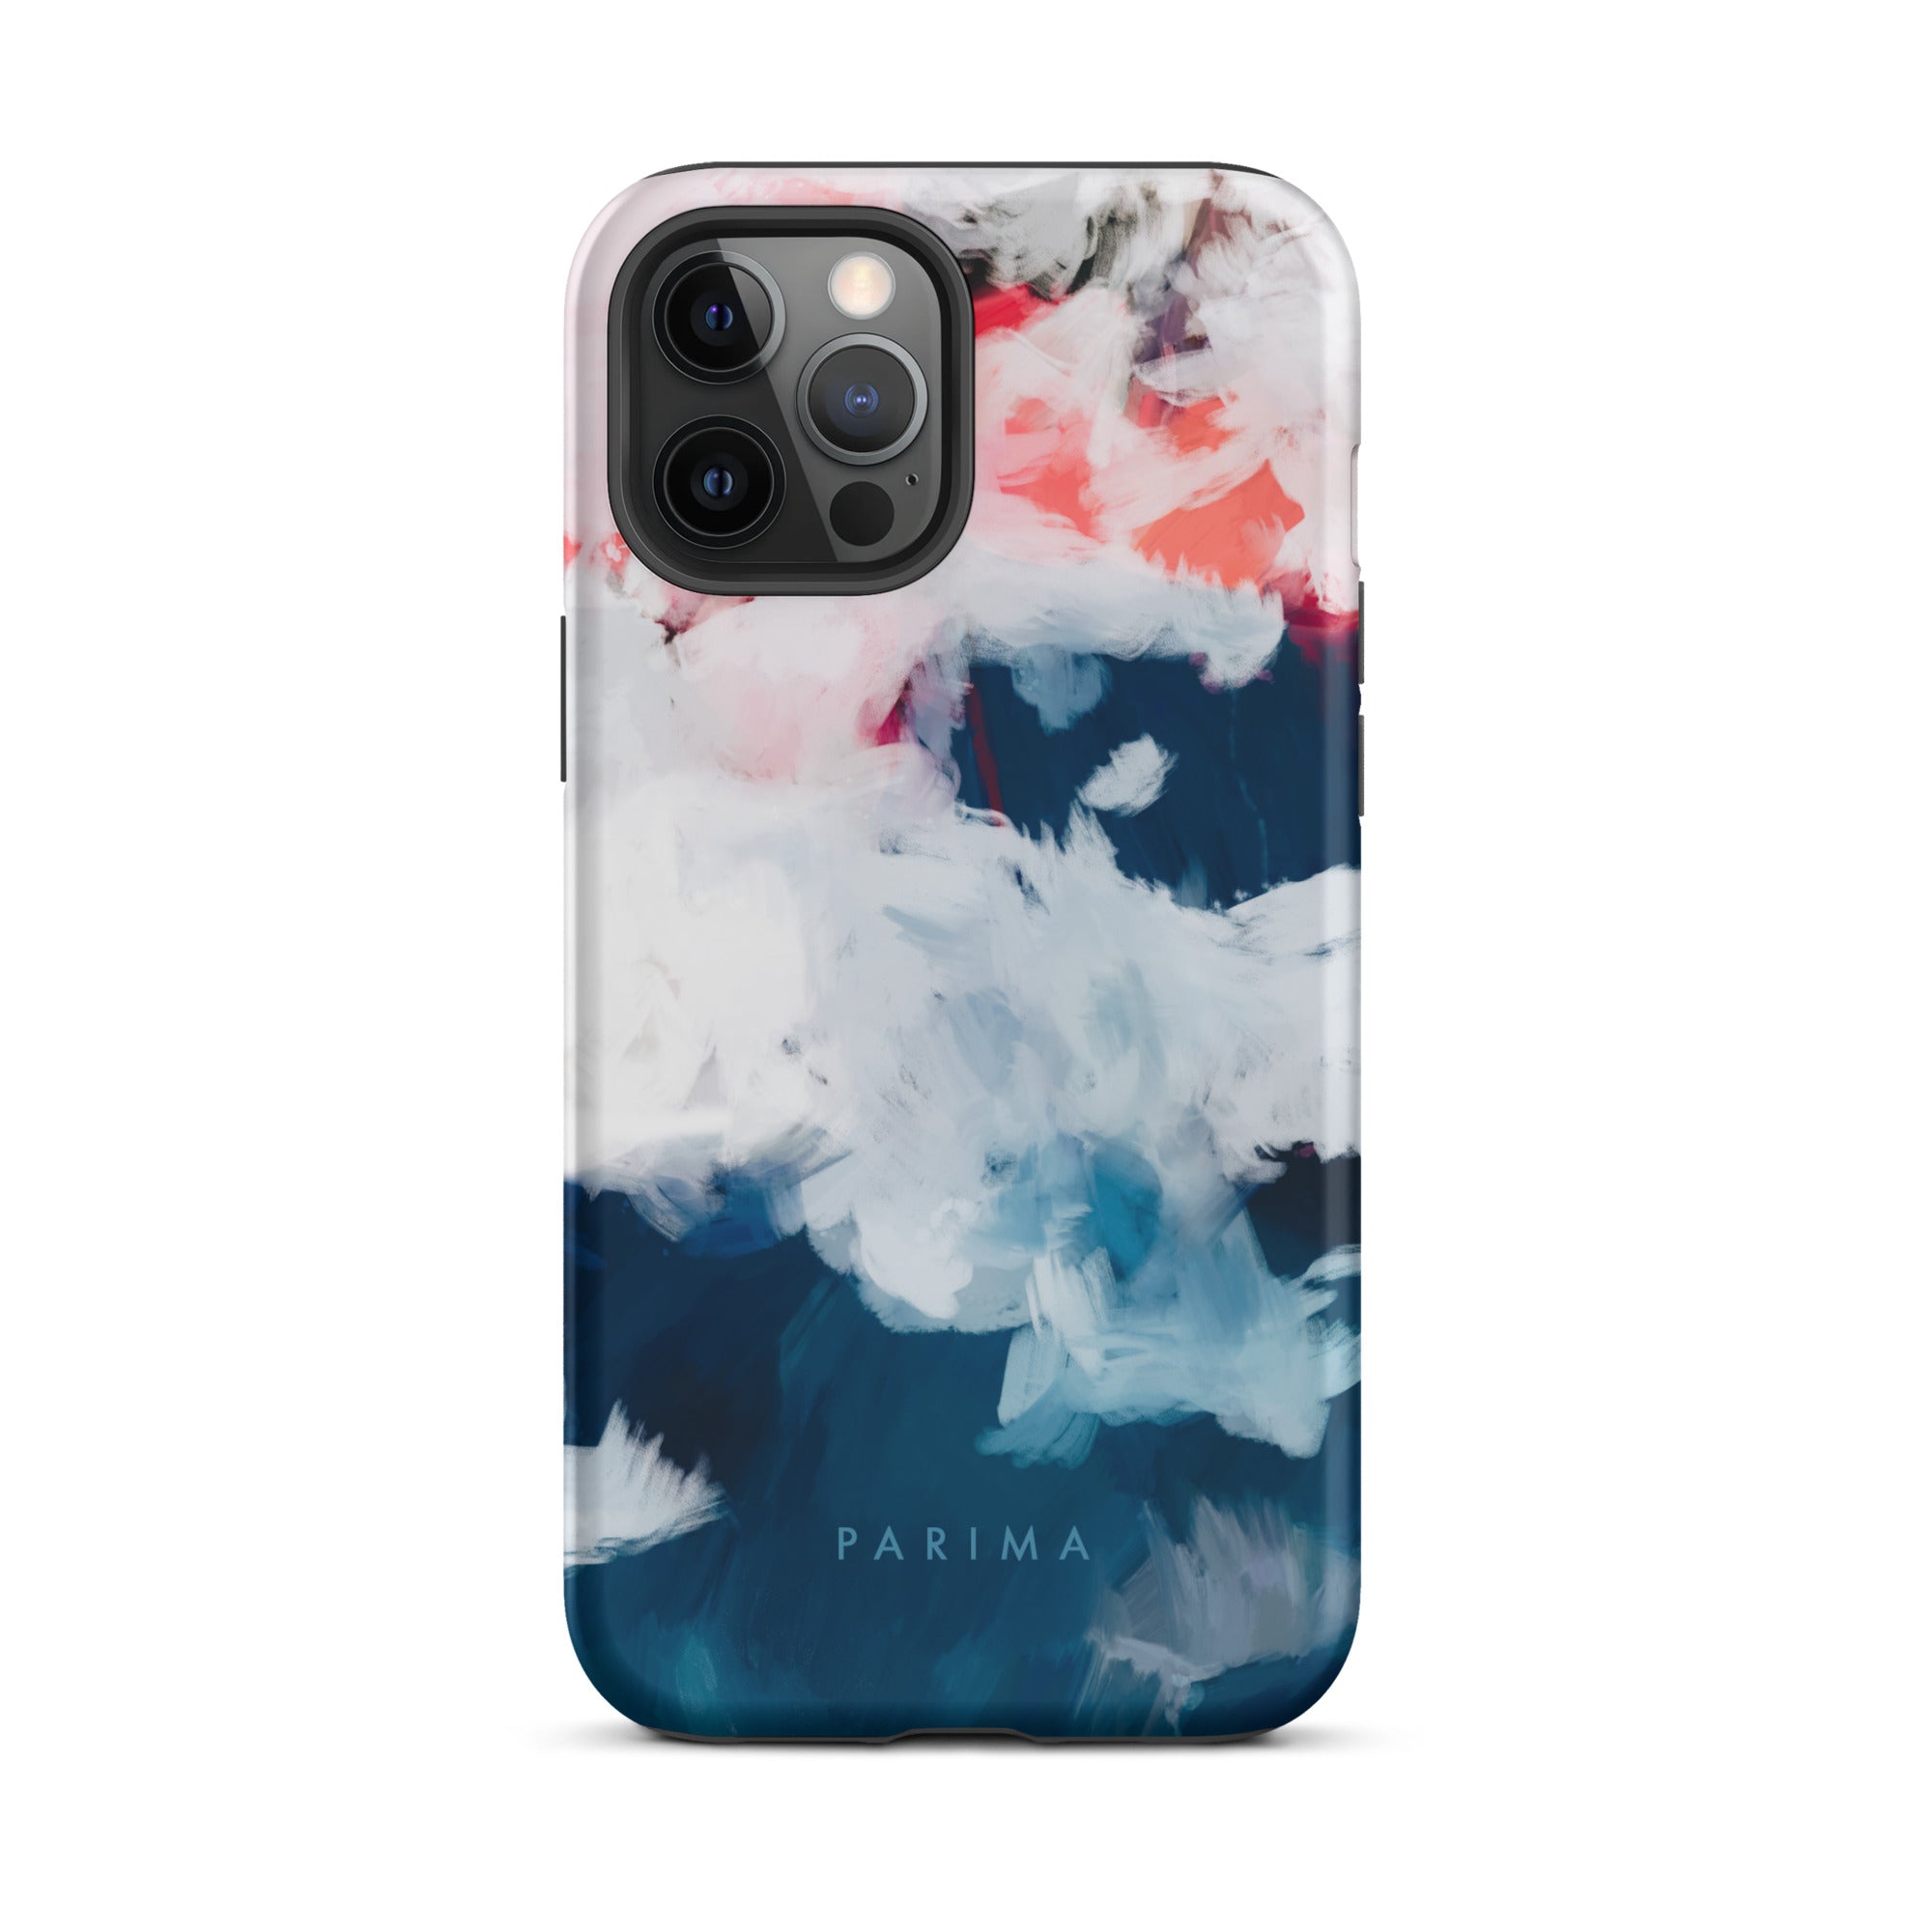 Oceane, blue and pink abstract art on iPhone 12 Pro Max tough case by Parima Studio